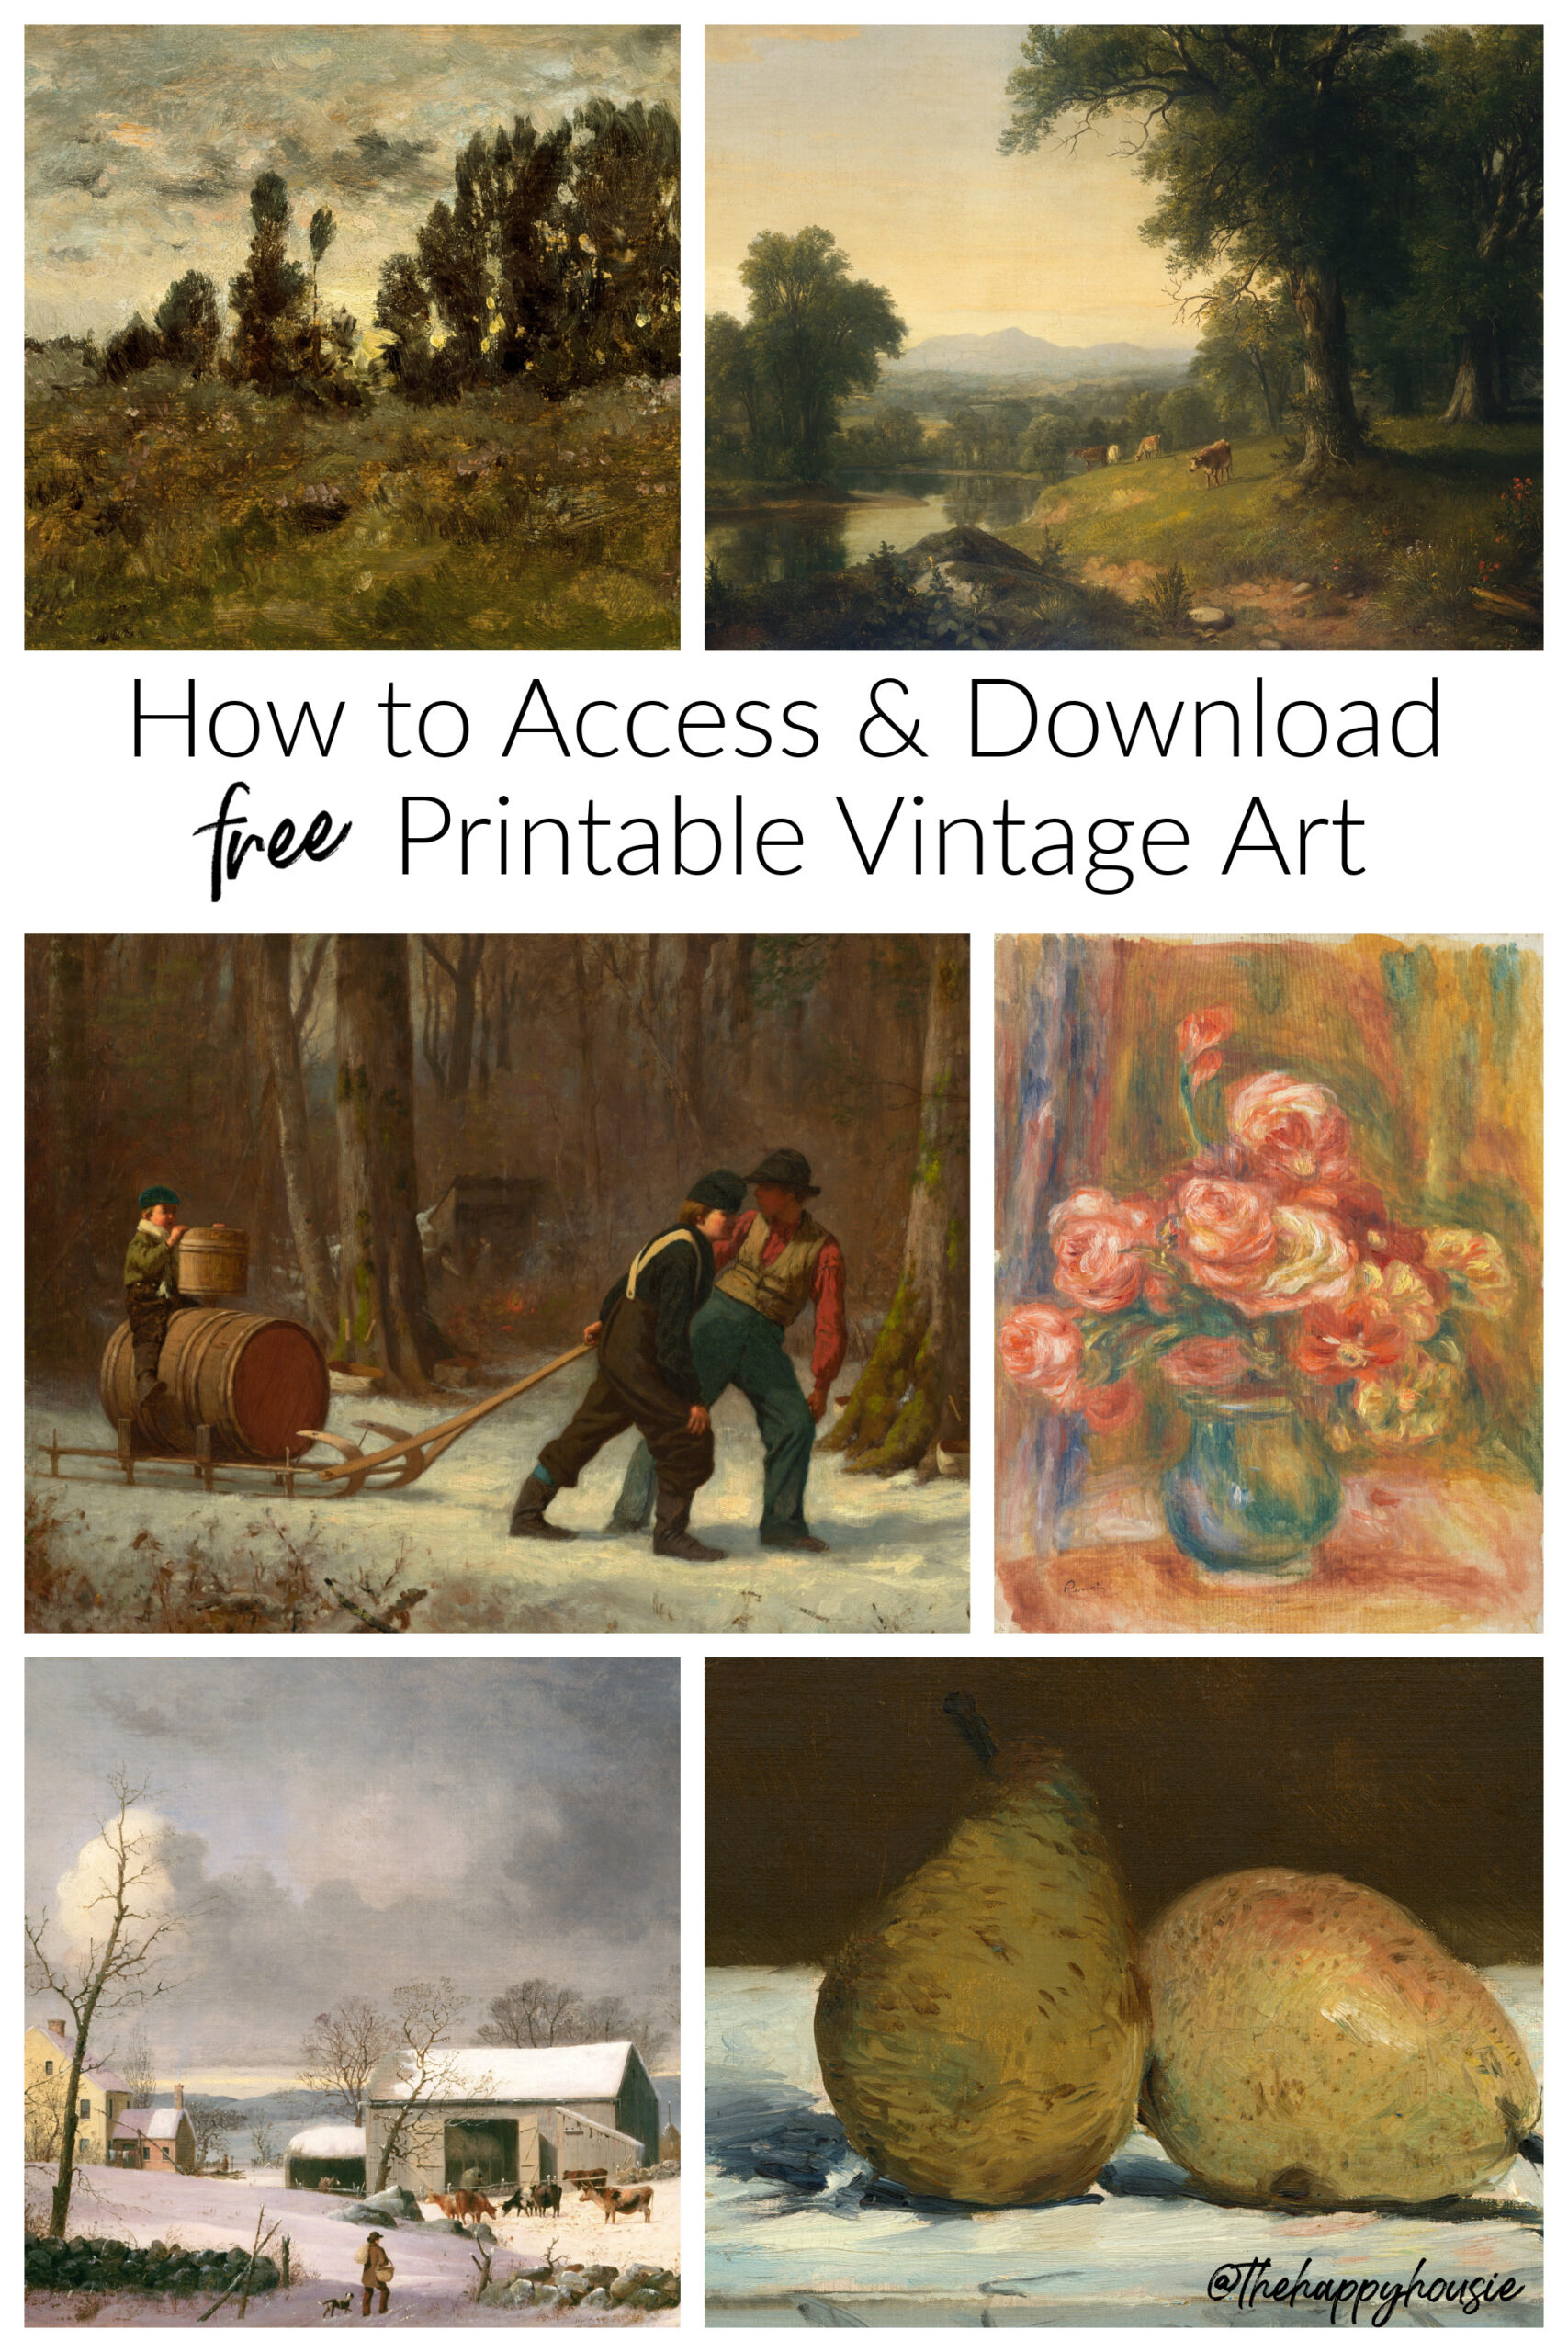 How To Access And Download Vintage Paintings To Print As Art | The - Free Printable Images Vintage